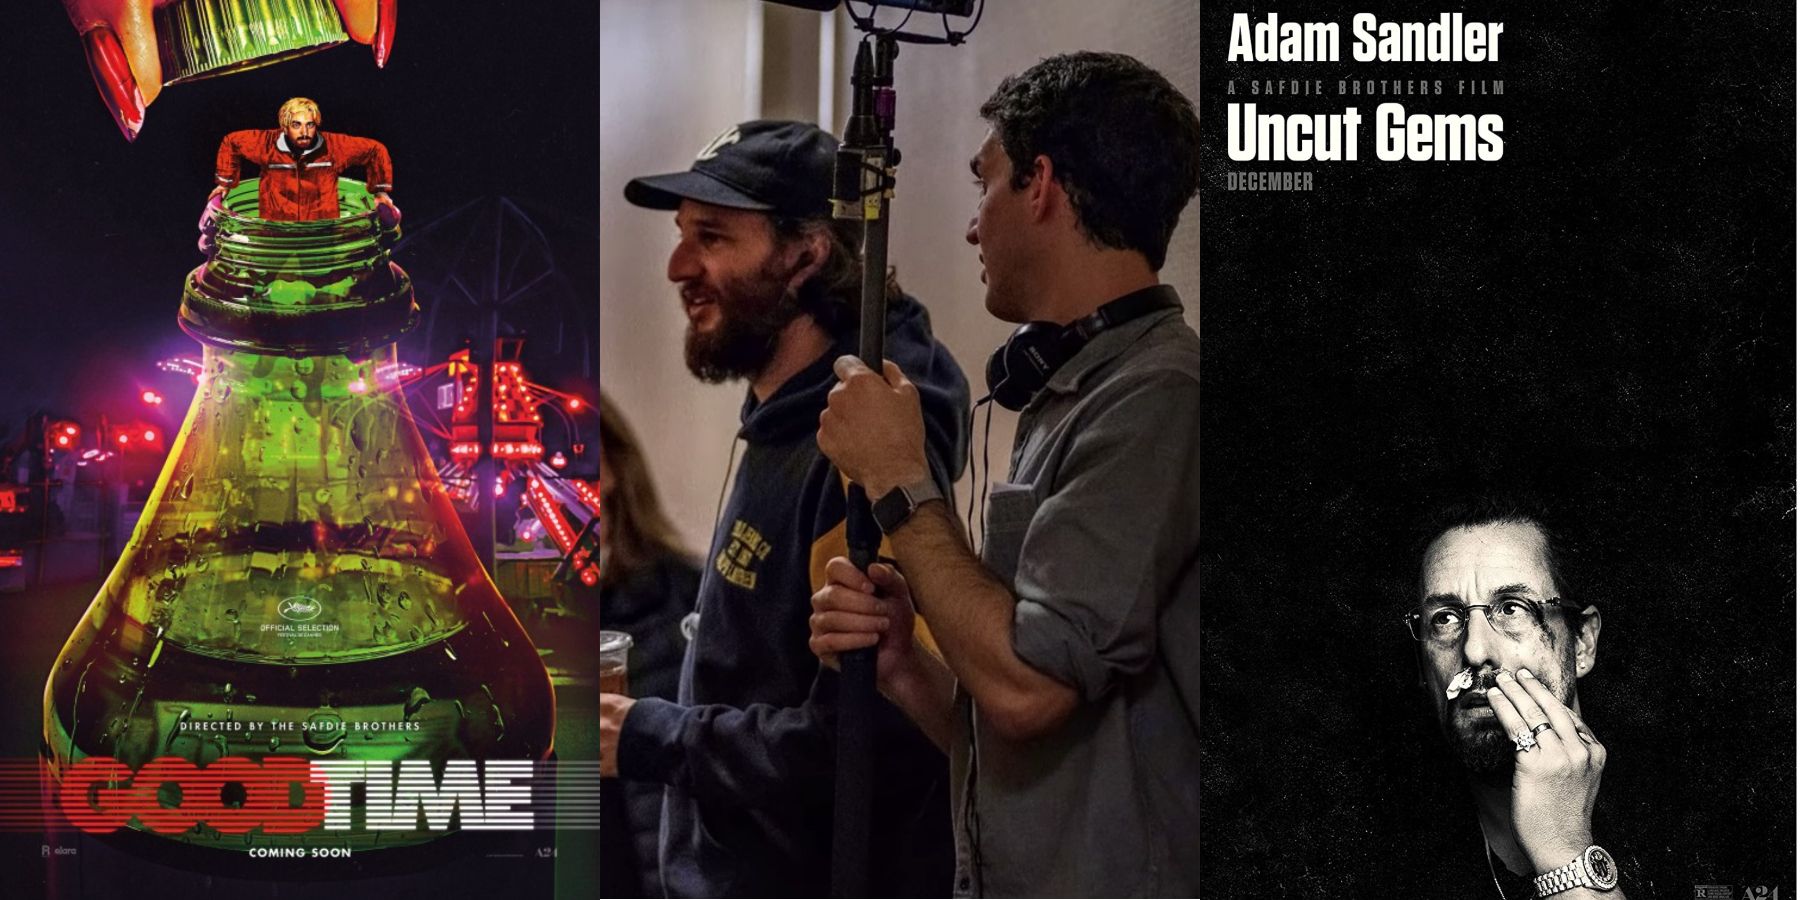 Split image showing the Safdie Brothers and the posters for Good Time and Uncut Gems